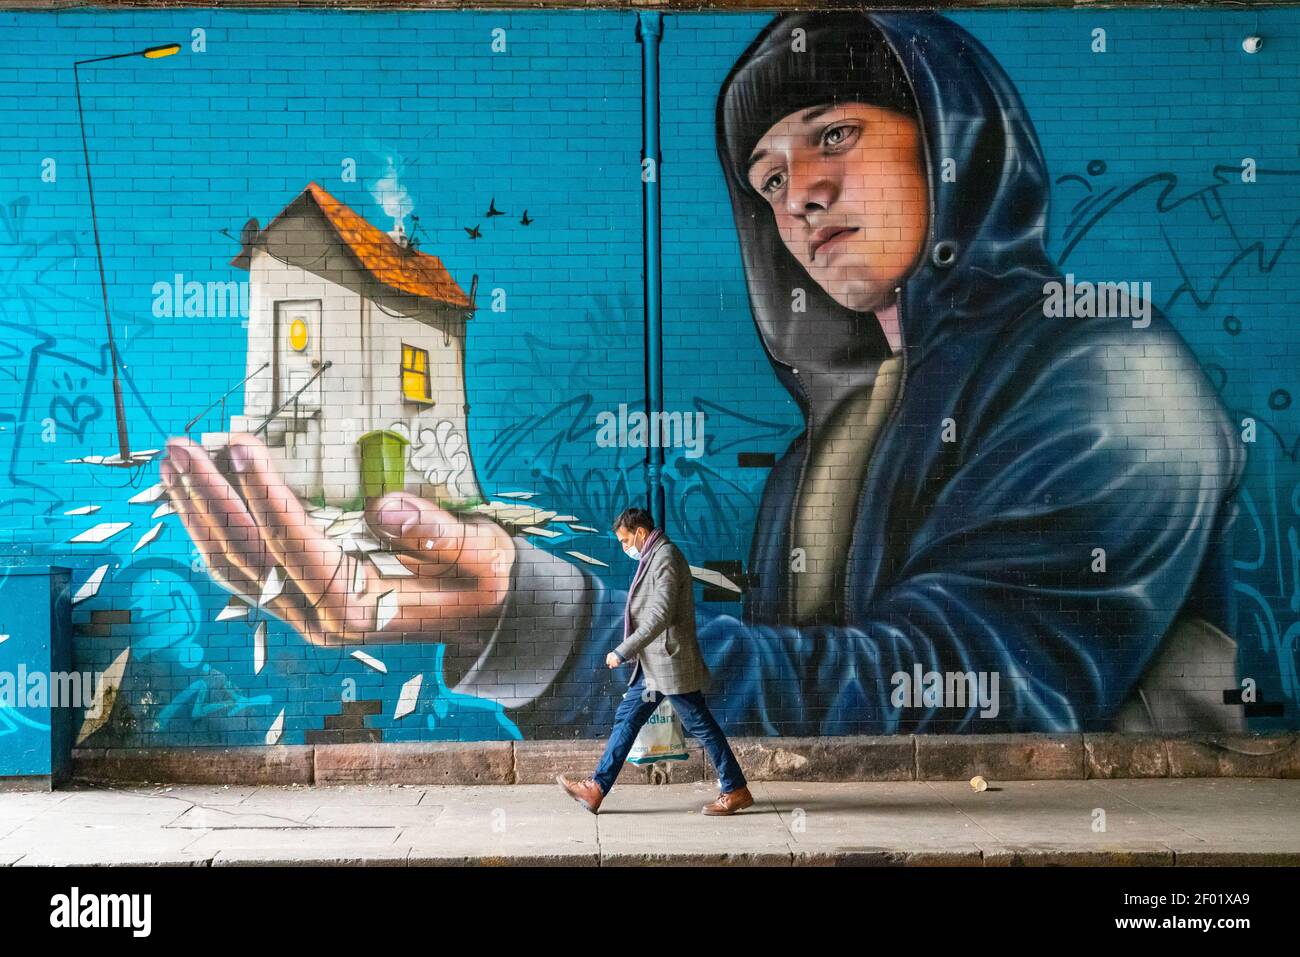 Glasgow, Scotland, UK. 6 Mar 2021. With Scotland remaining under national lockdown during the covid-19 pandemic Glasgow city centre remains a virtual ghost town with few people in the city centre and almost all shops and businesses still closed.  Pic; Man wearing facemask walks past large mural with End Youth Homelessness theme  by GW McLaughlin in the city centre. Iain Masterton/Alamy Live News Stock Photo